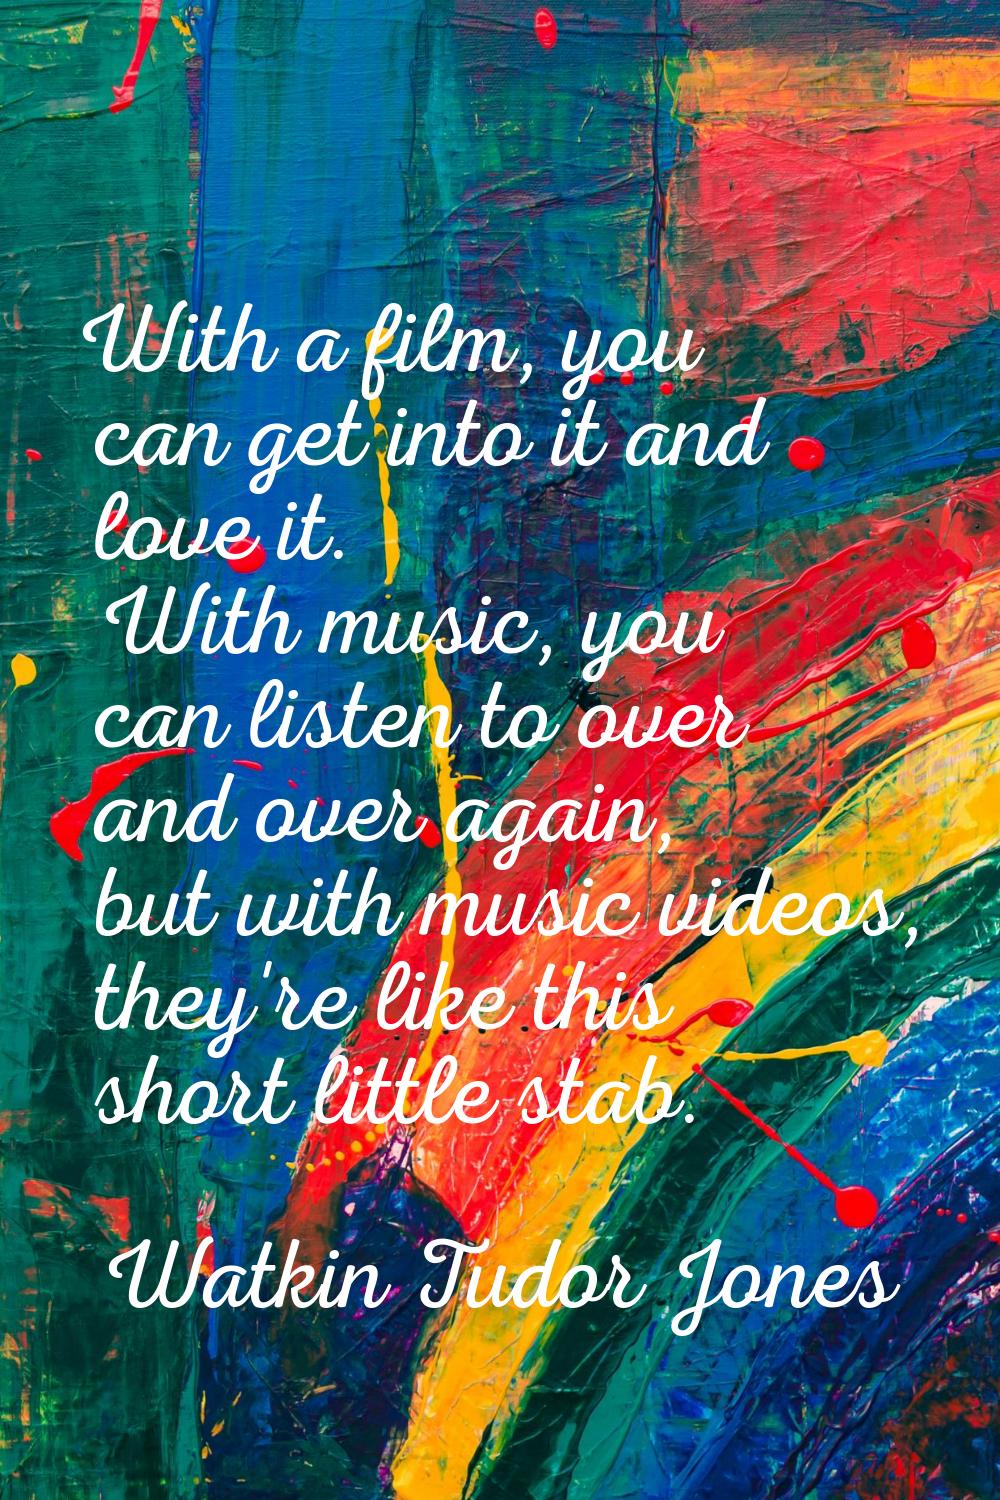 With a film, you can get into it and love it. With music, you can listen to over and over again, bu